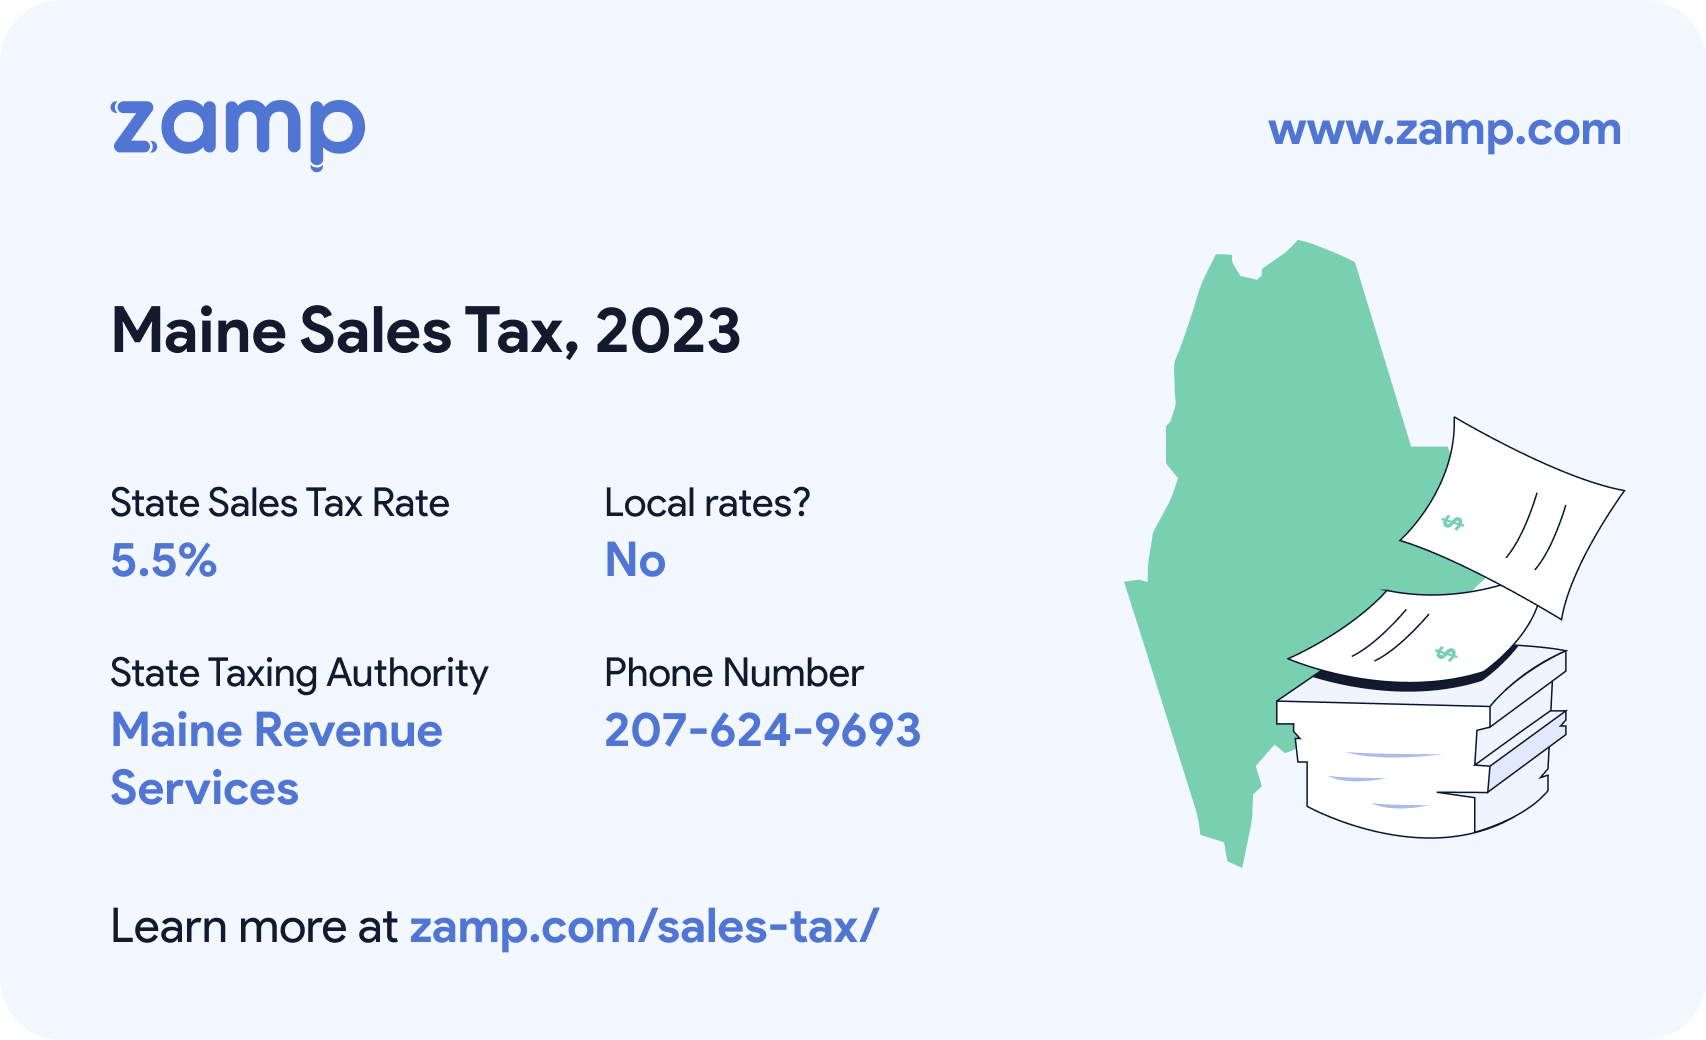 Maine basic sales tax info for 2023 - State sales tax rate: 5.5%, Local rates? No; State Taxing Authority: Maine Revenue Services; and phone number 207-624-9693